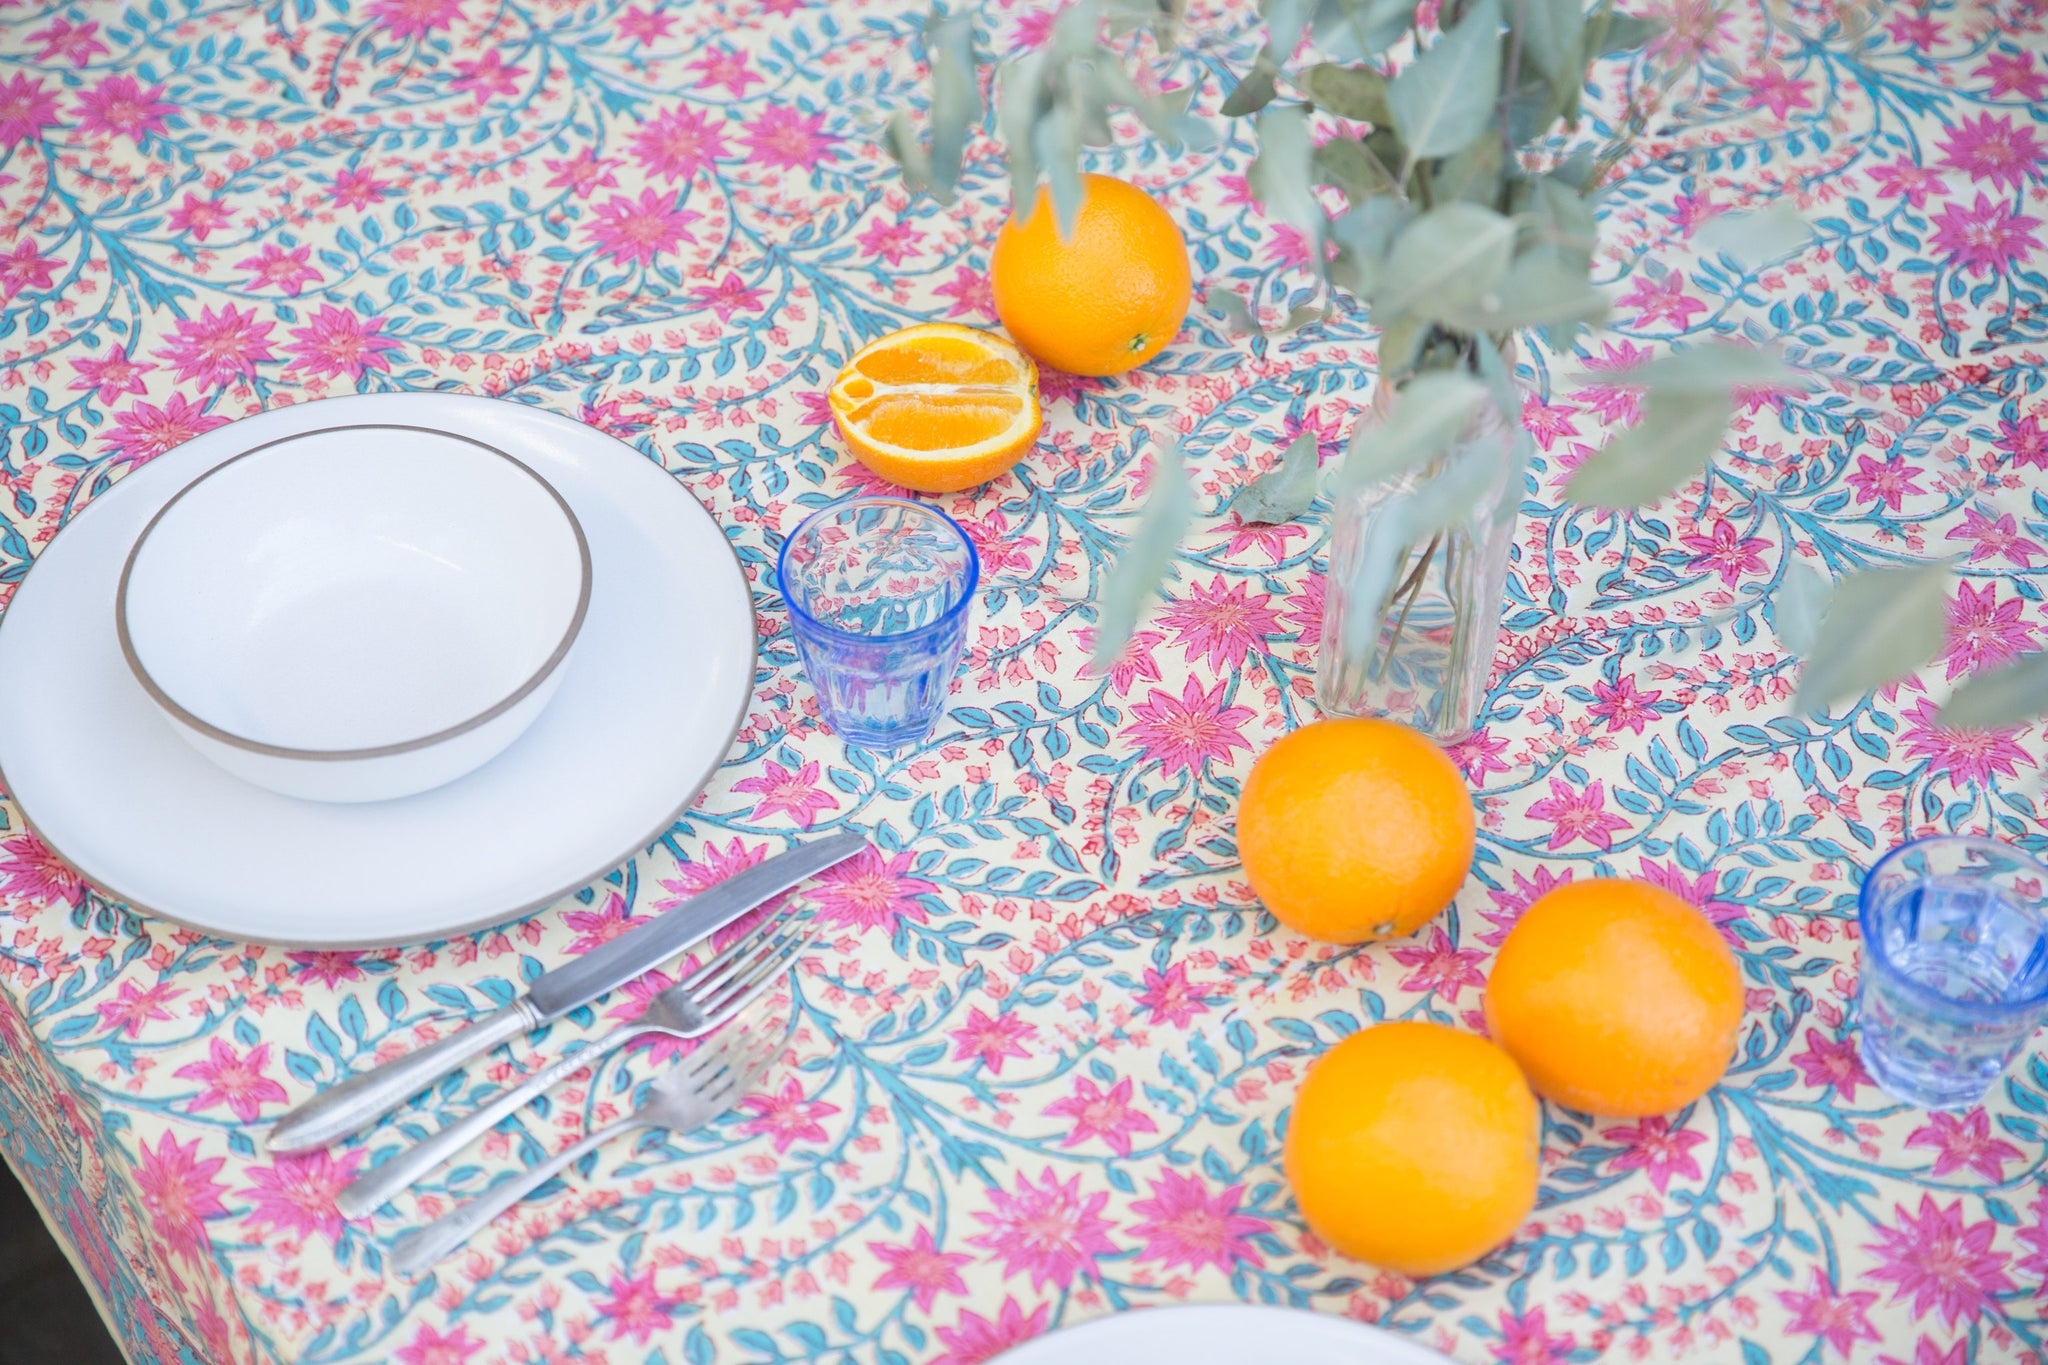 pink floral tablecloth with oranges and white plates